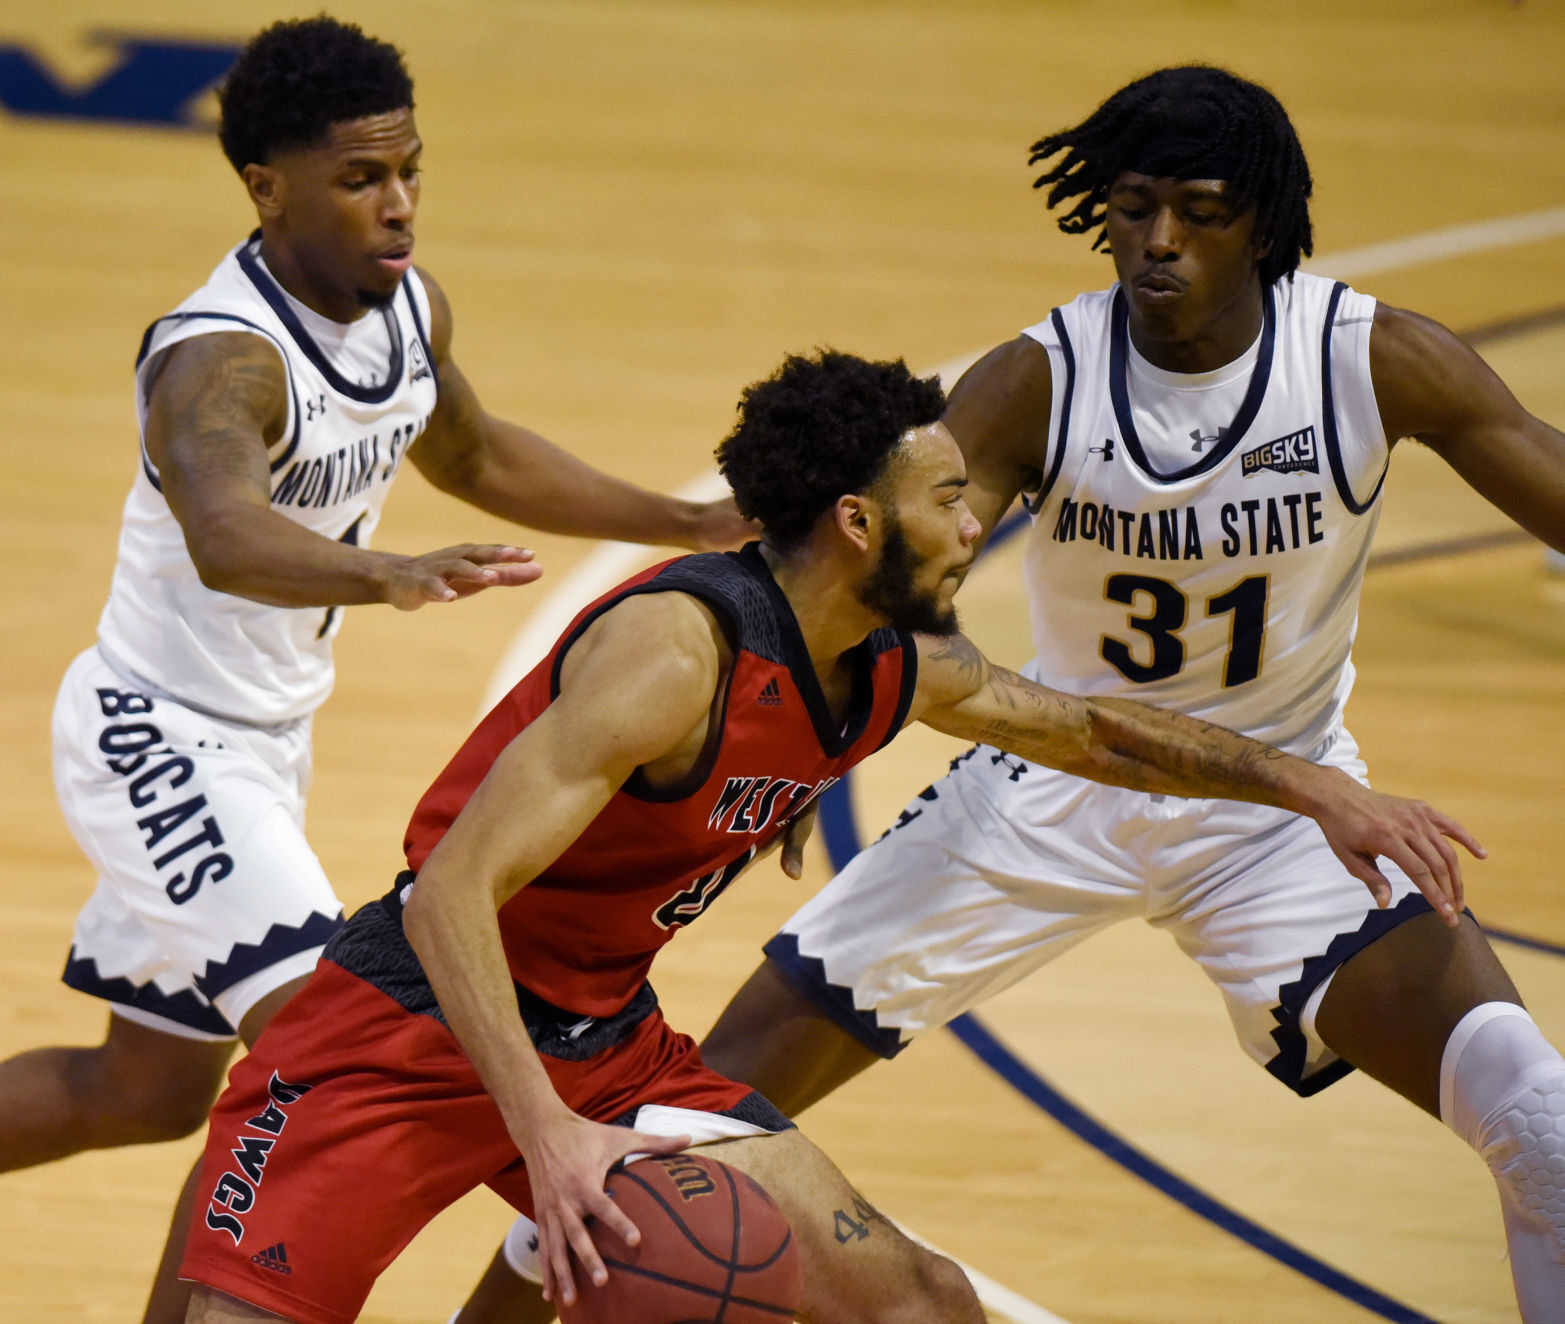 Its crazy Montana State men topple Montana Western in impromptu game